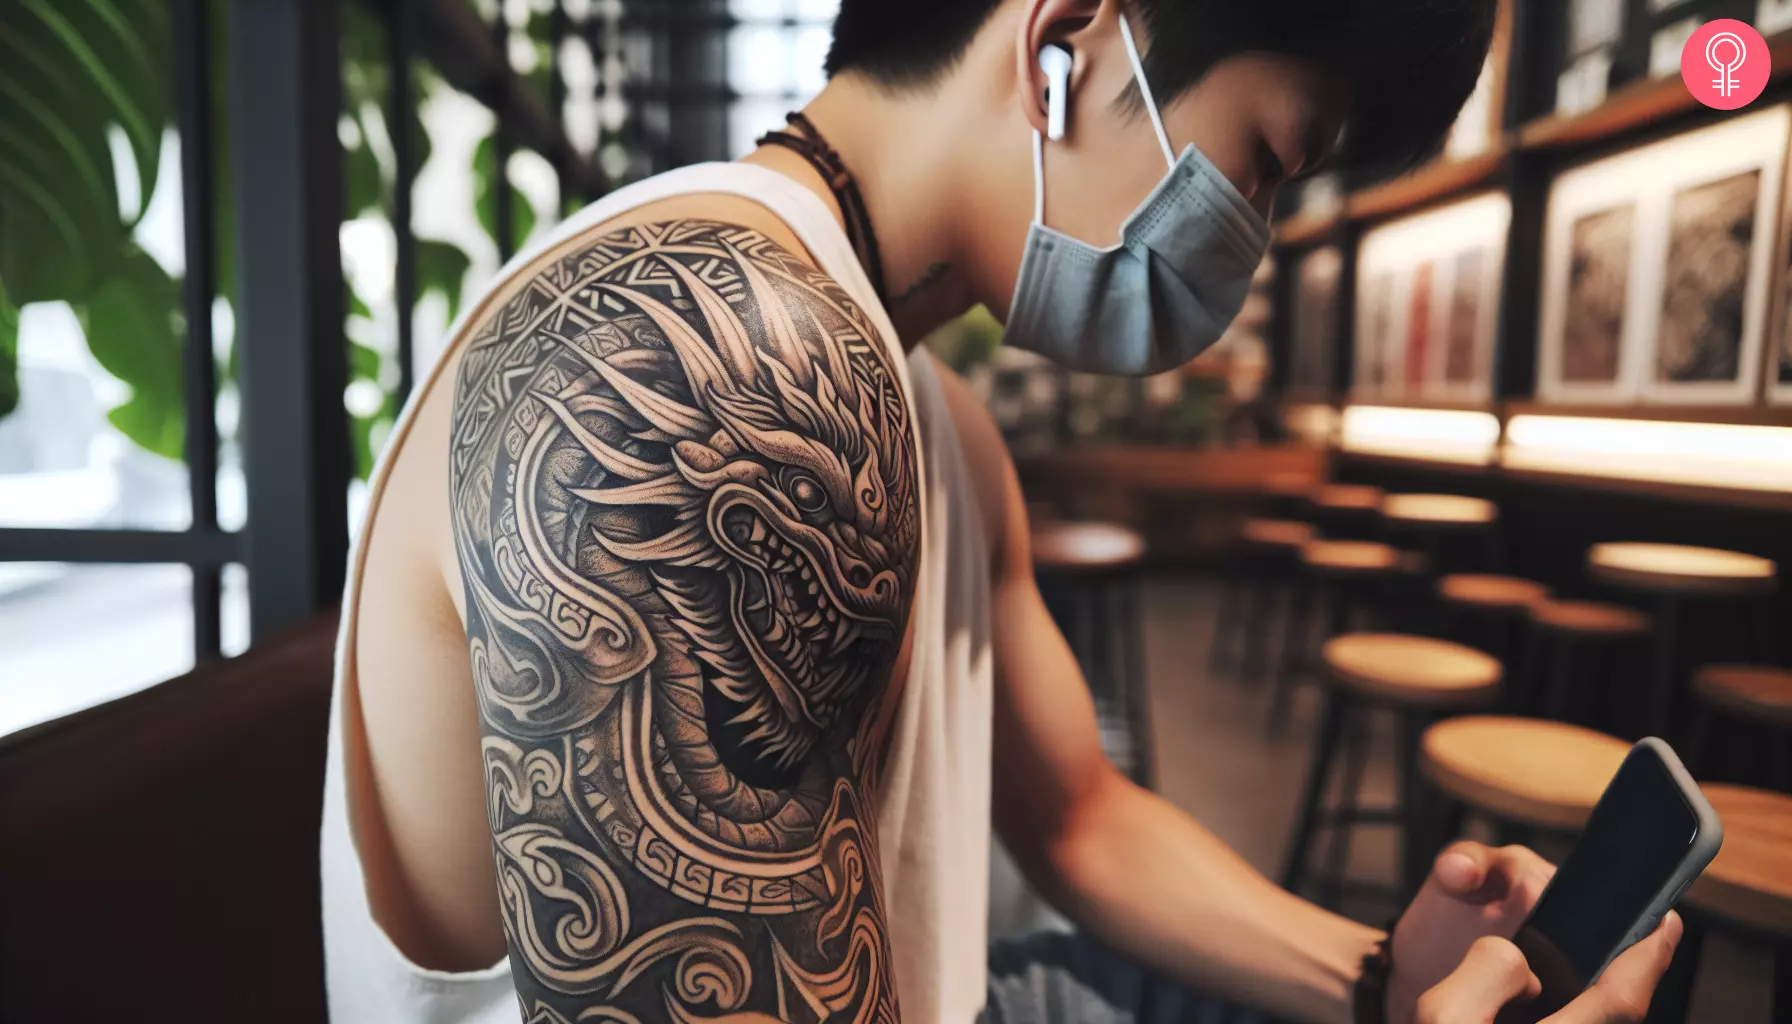 A black ink Aztec style dragon tattoo on the upper arm and shoulder